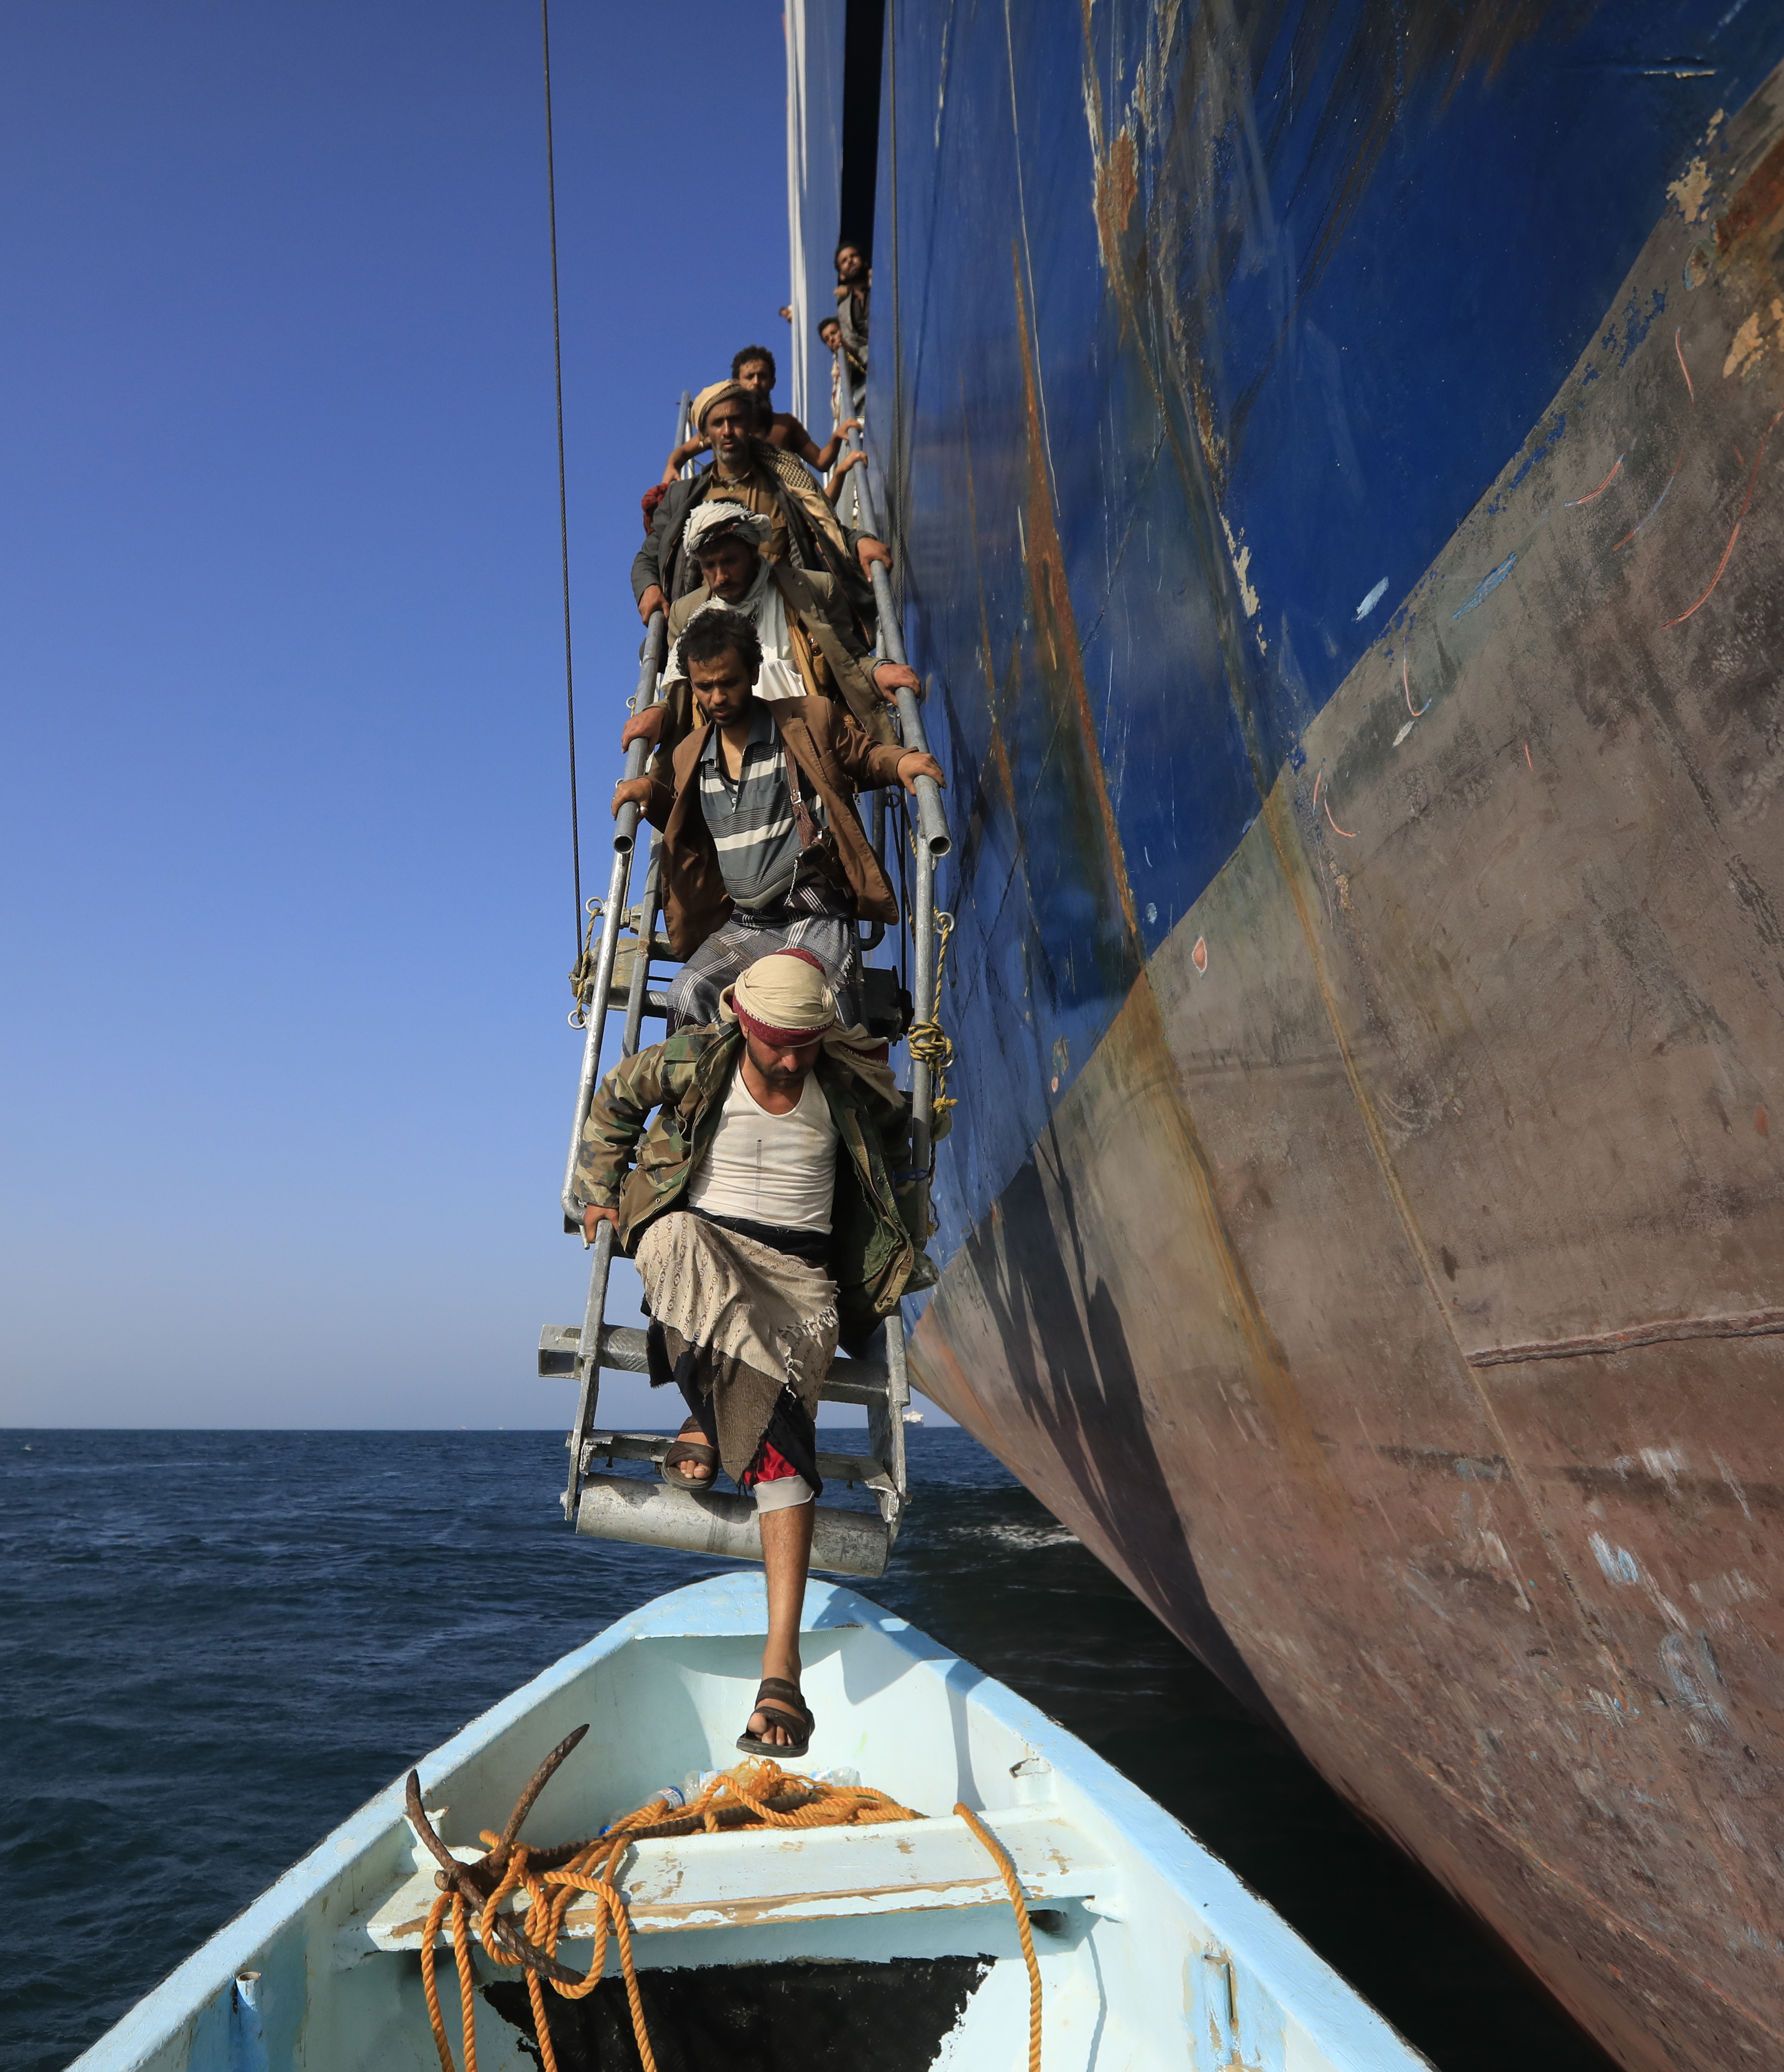 The ship is being lauded all over social media as Houthi supporters travel hundreds of miles to visit it